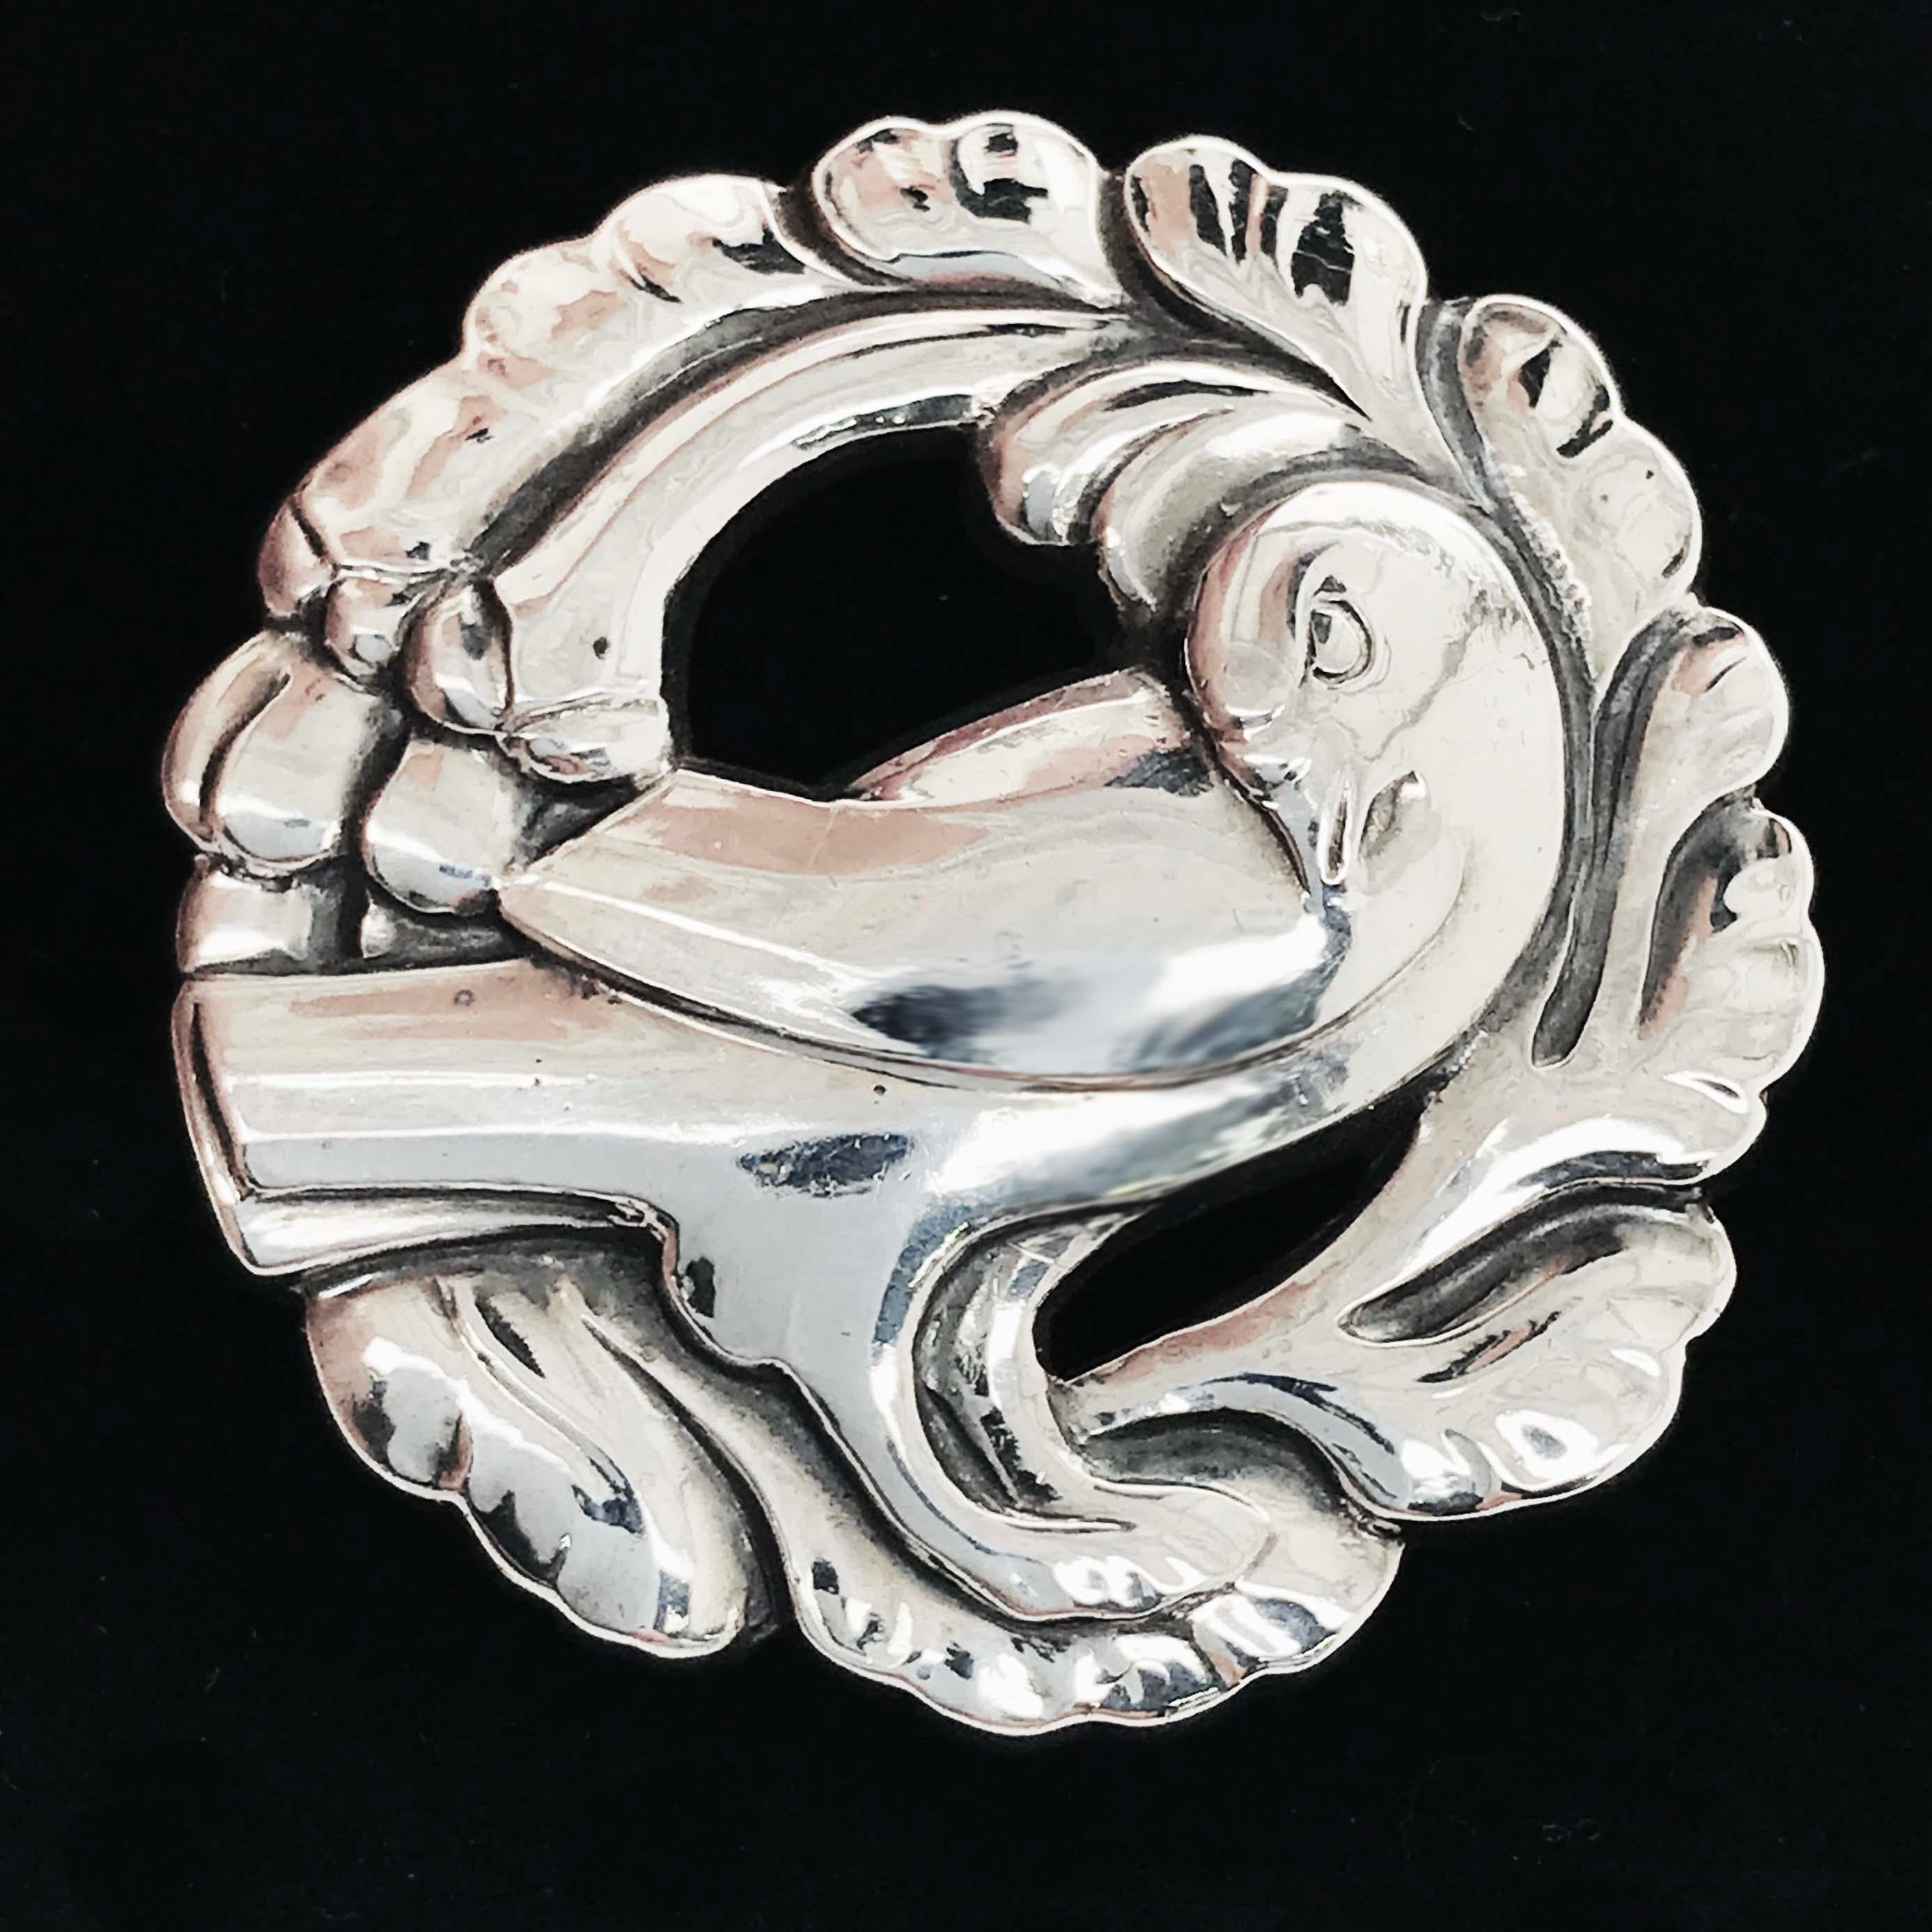 The genuine vintage Georg Jensen dove brooch is an antique fine jewelry piece pre 1945. Georg Jensen is a famous jewelry designer located in Copenhagen, Denmark. He was known for his Scandinavian, Art Nouveau designs and creations. This sterling